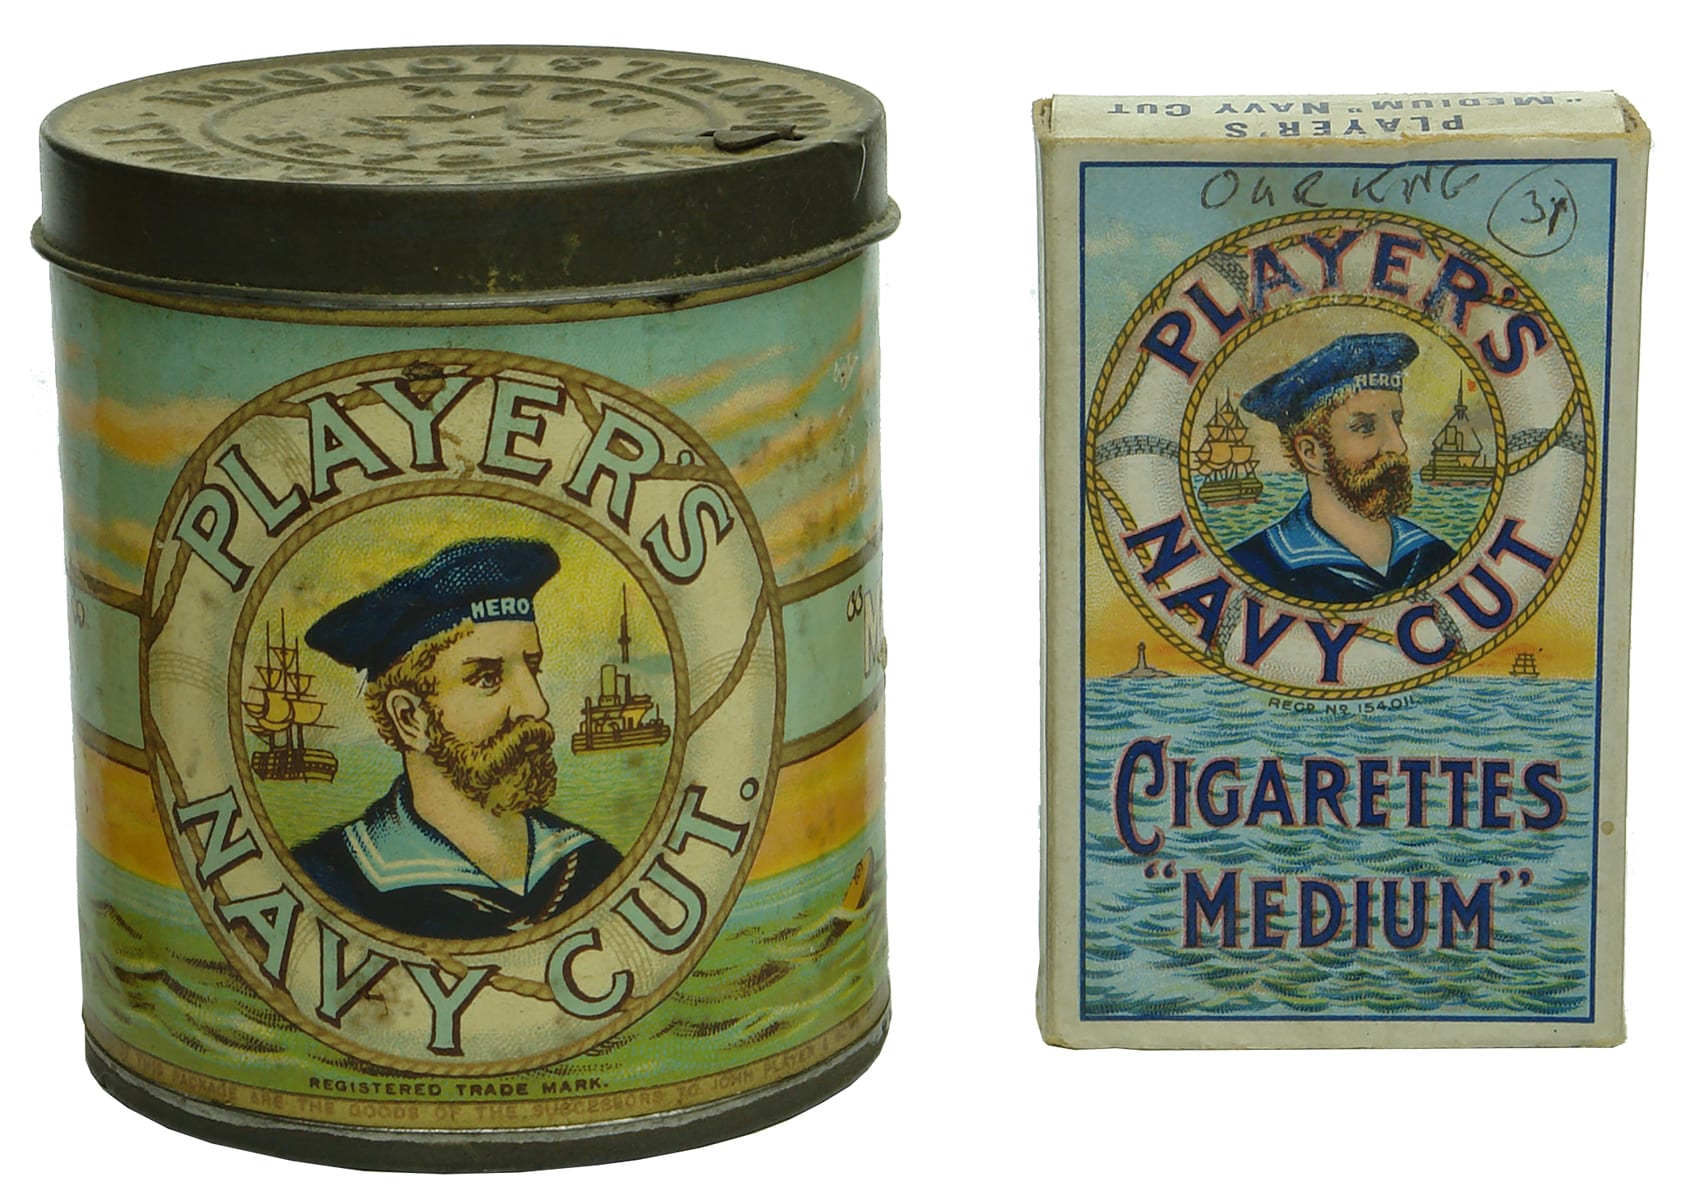 Players Navy Cut Cigarettes Packaging